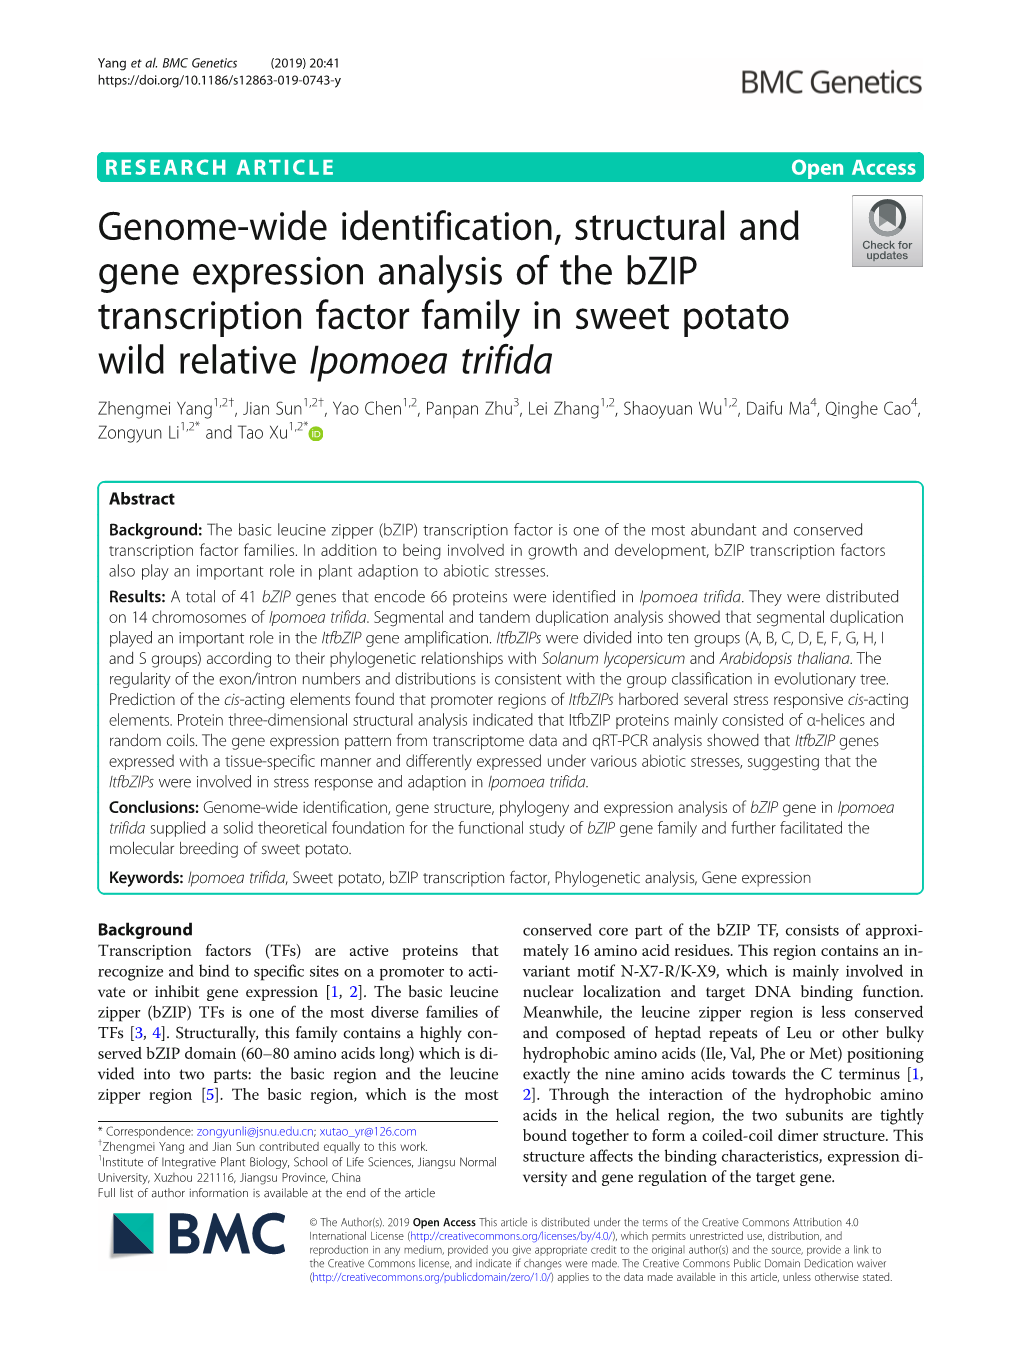 Genome-Wide Identification, Structural and Gene Expression Analysis Of